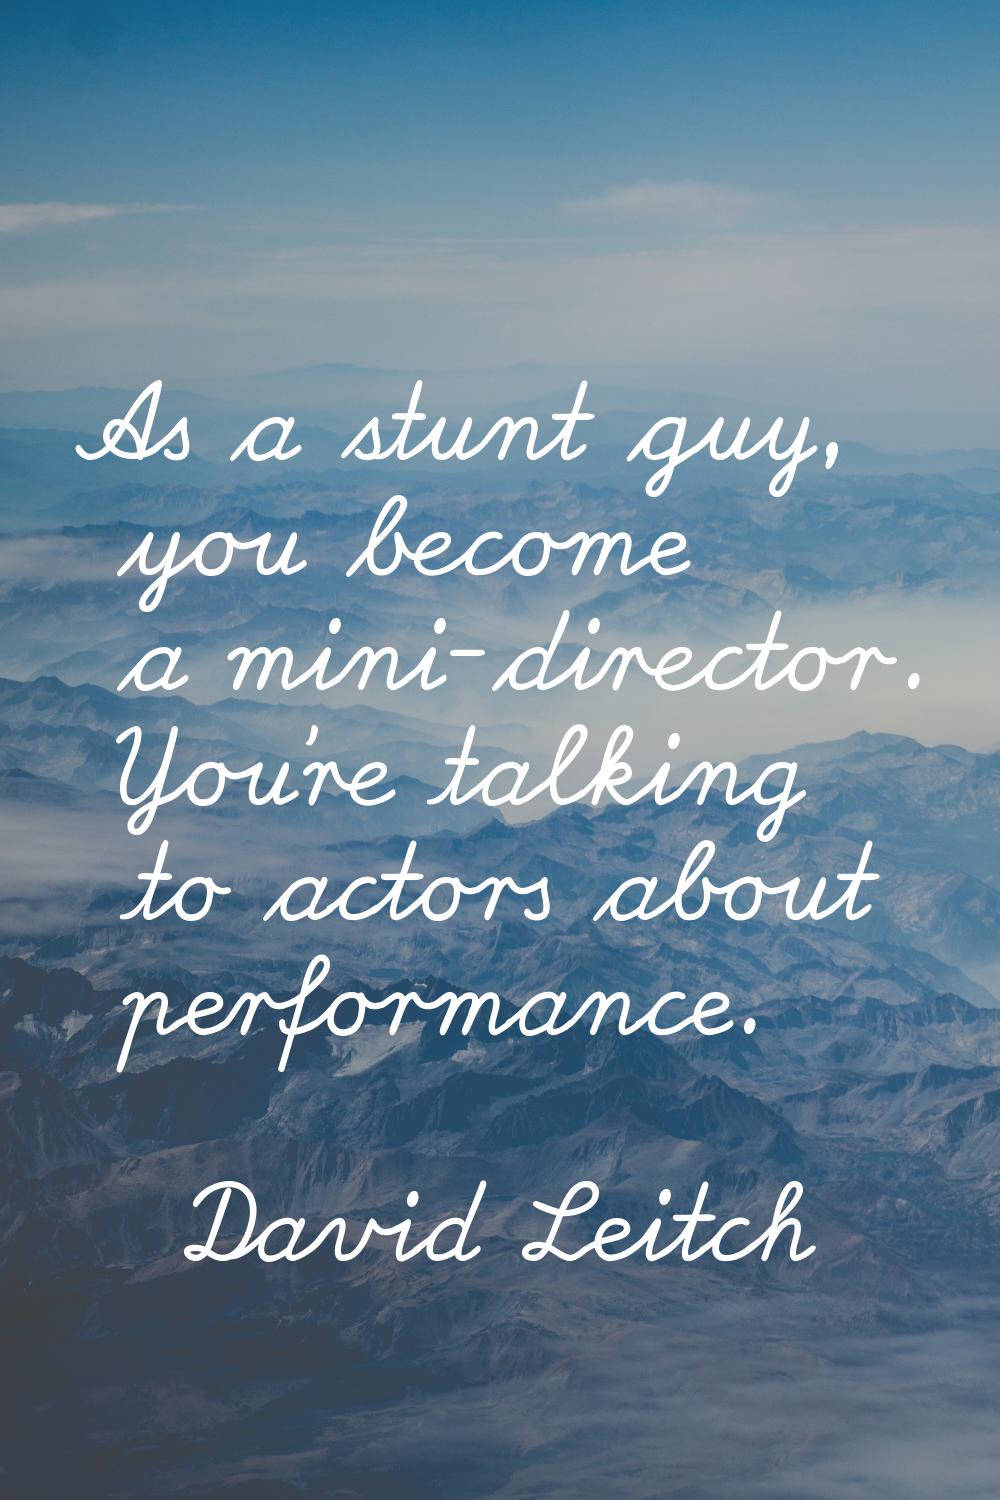 As a stunt guy, you become a mini-director. You're talking to actors about performance.